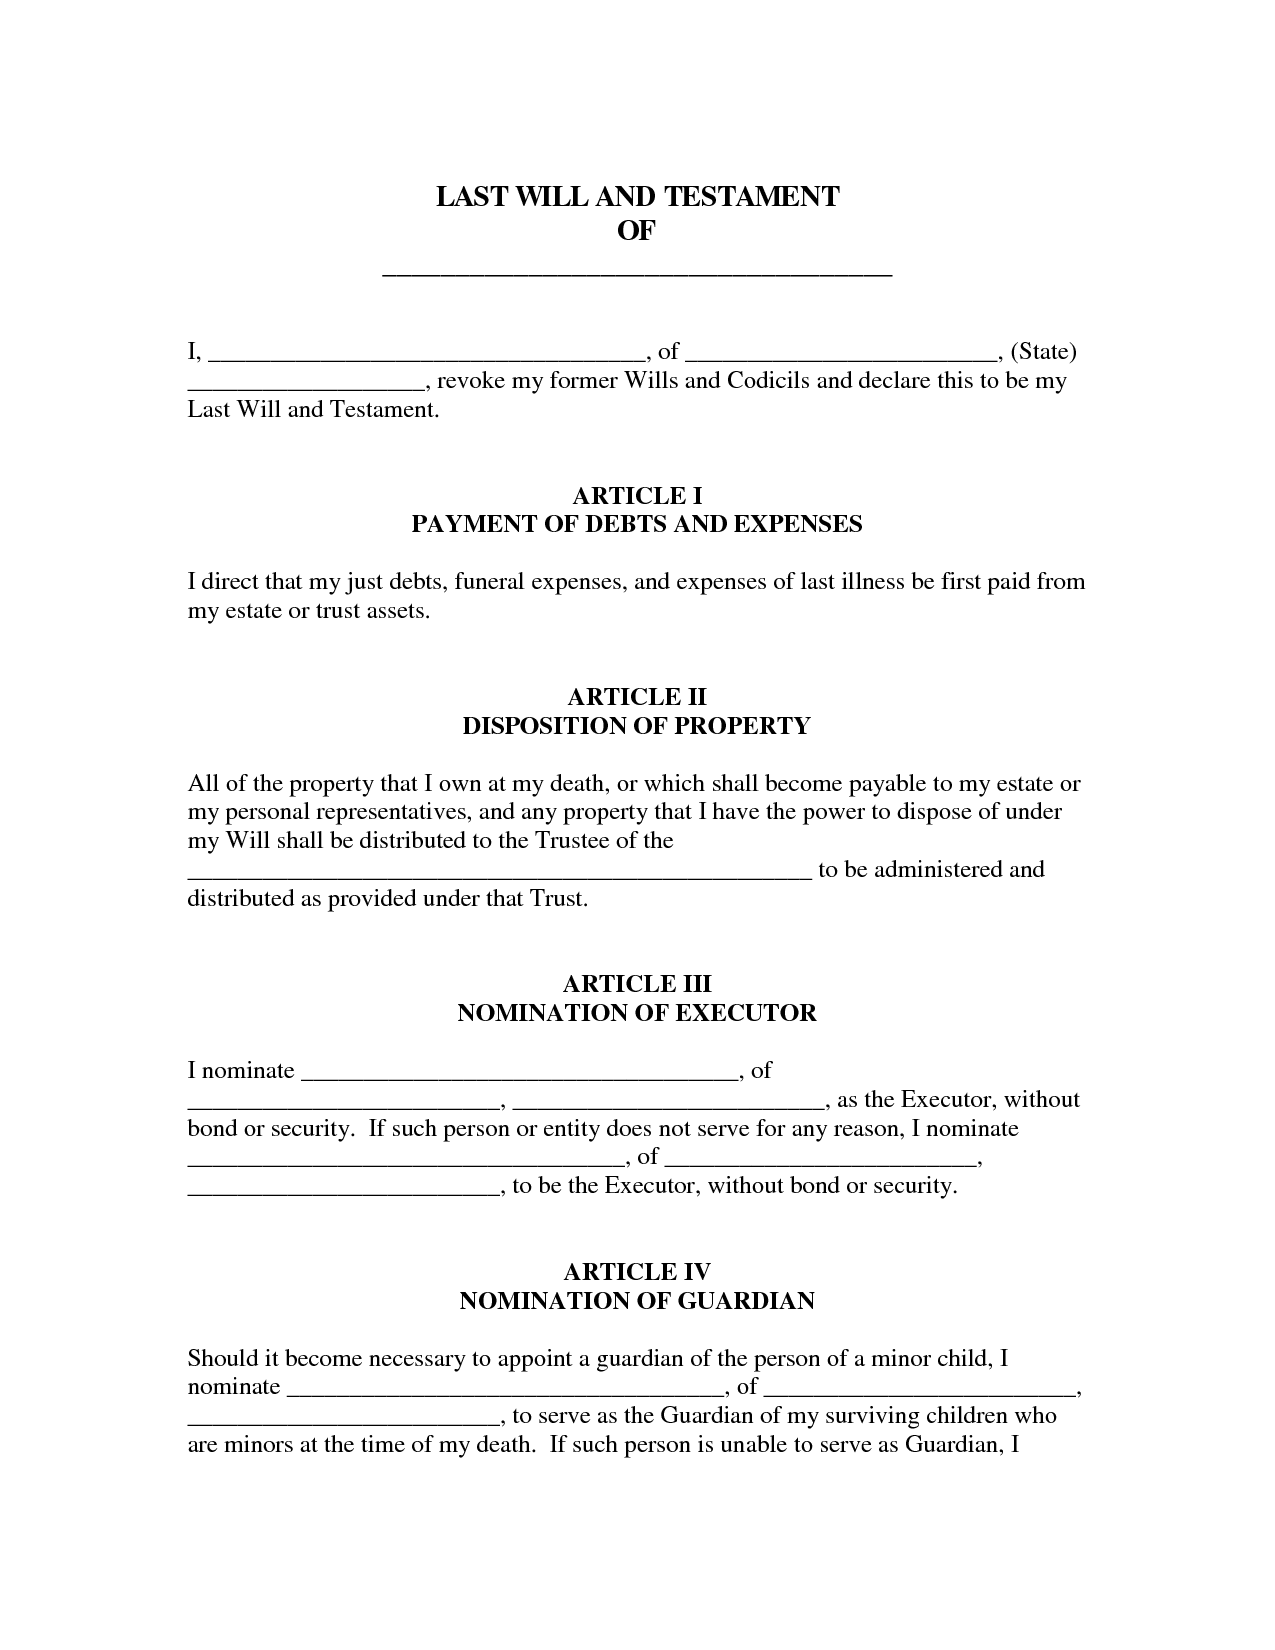 free-printable-last-will-and-testament-blank-forms-ga-printable-forms